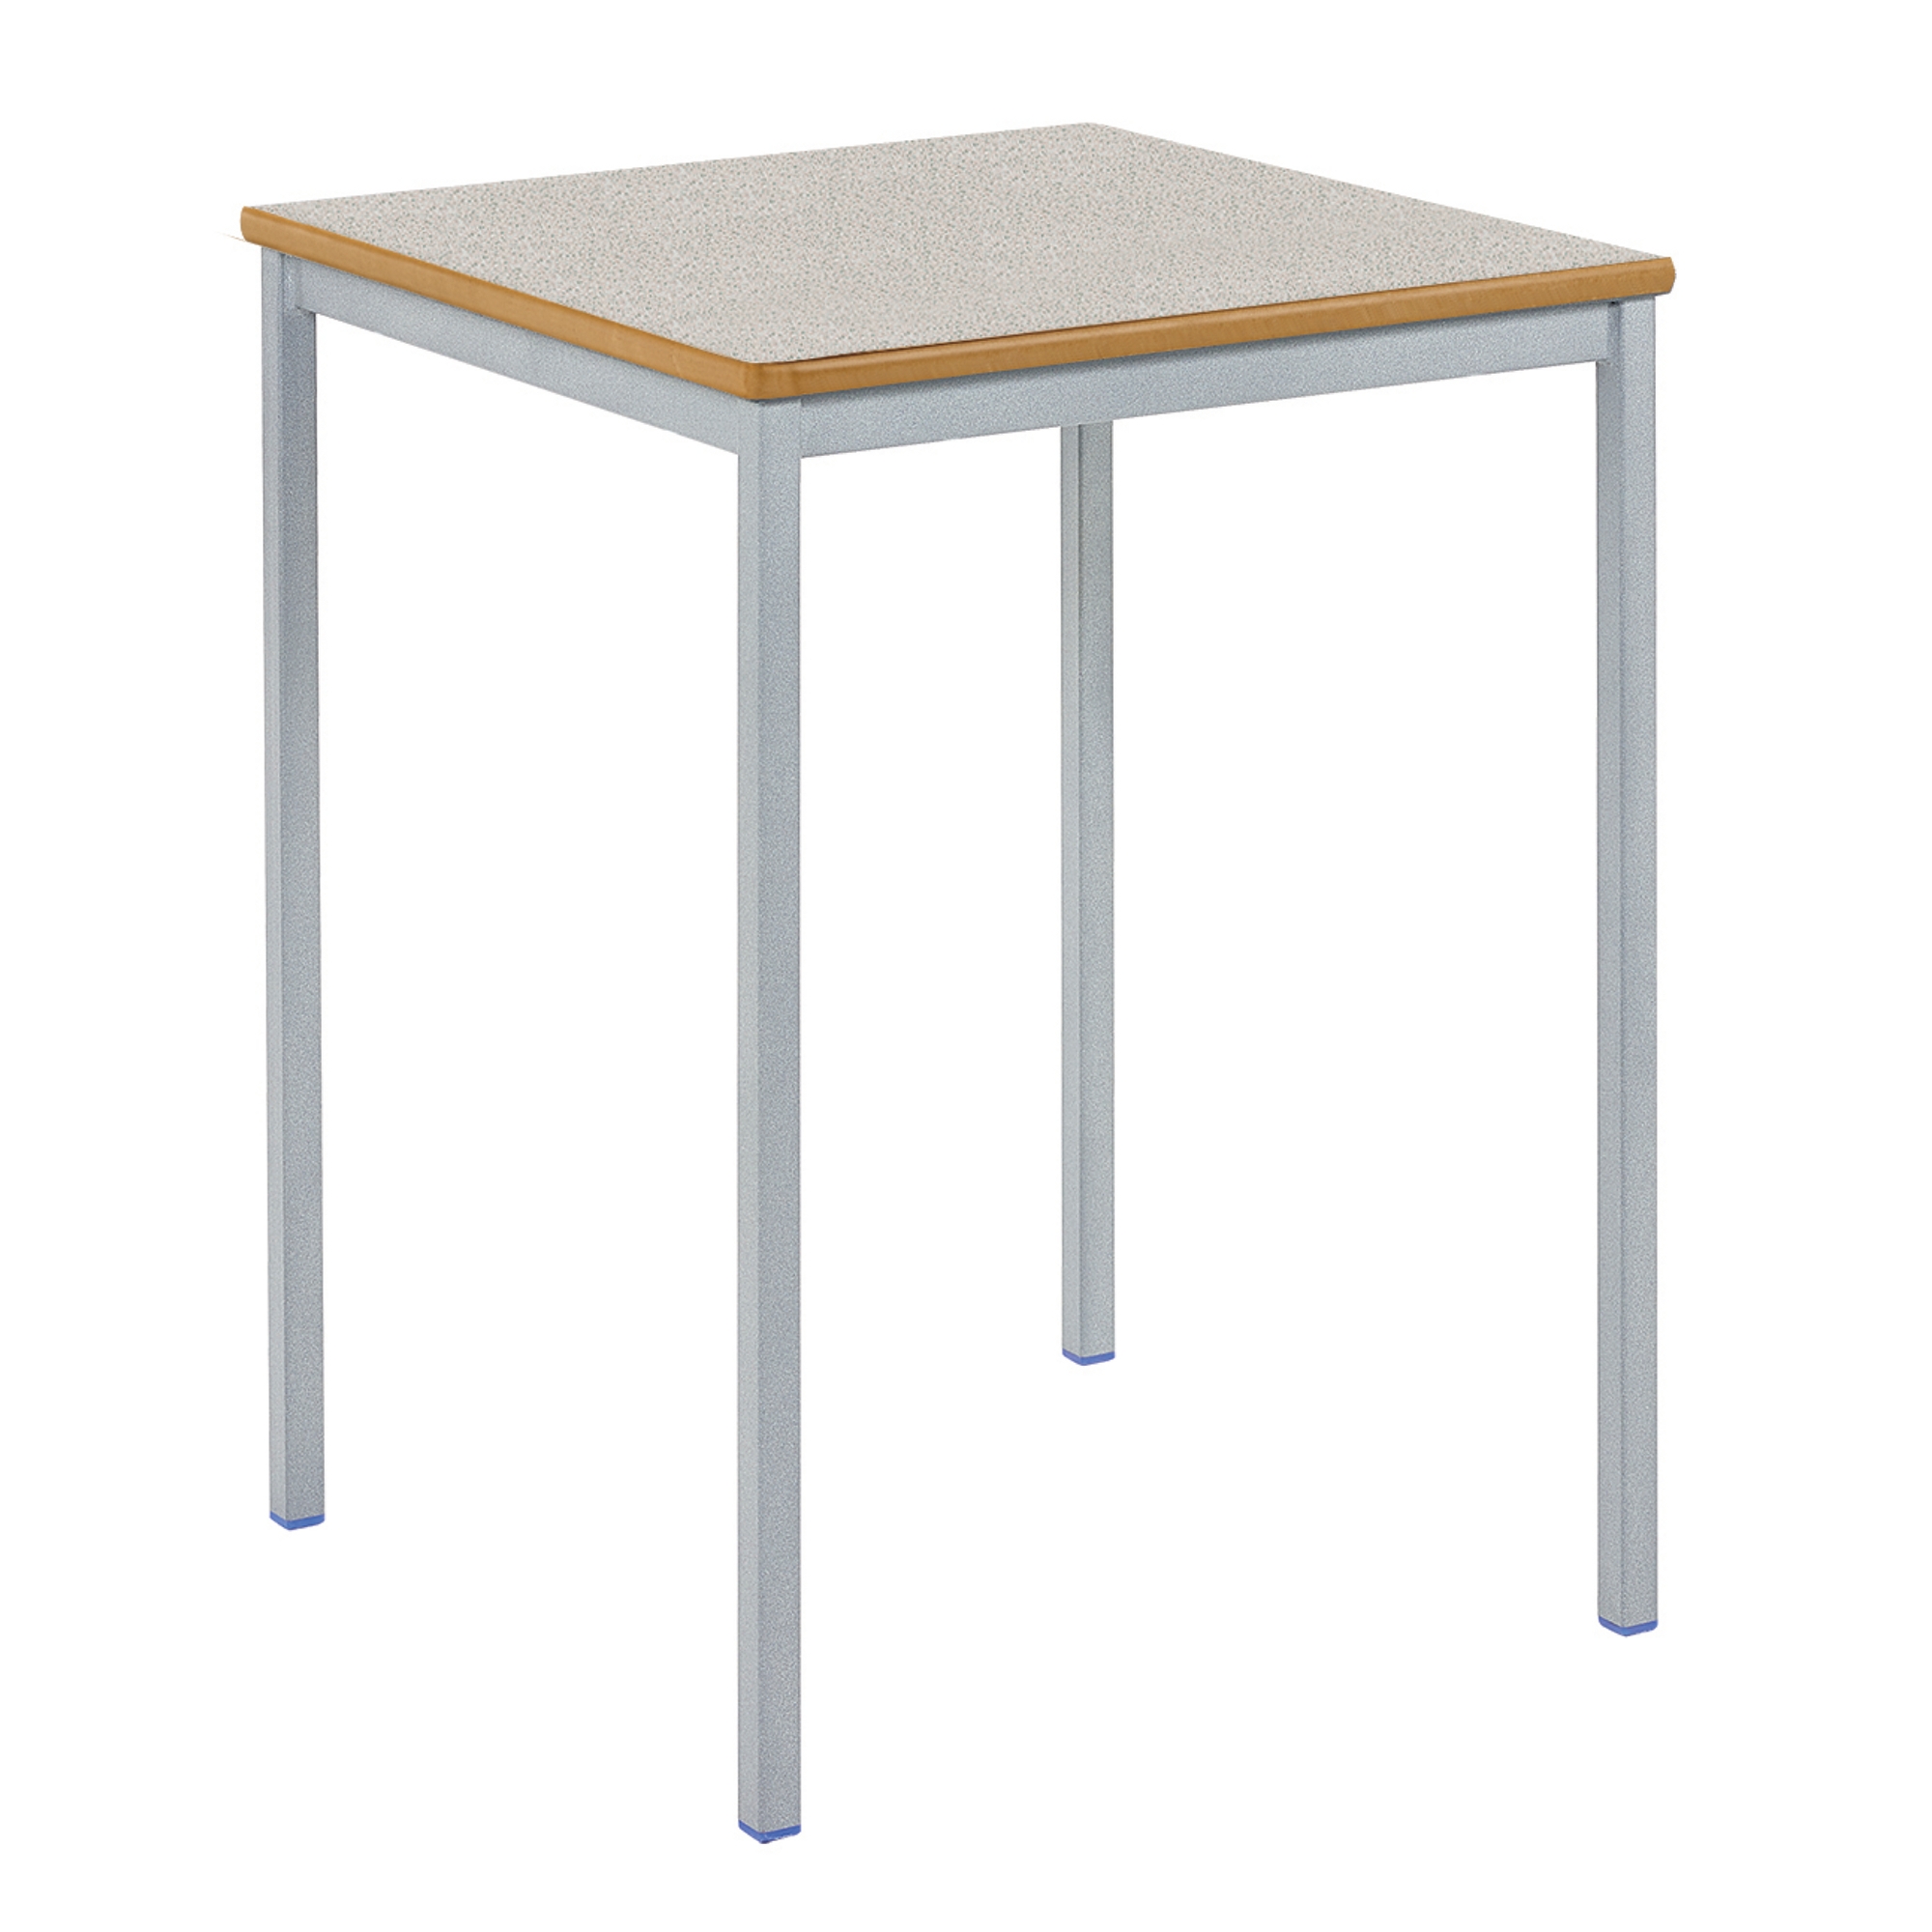 Classmates Square Fully Welded Classroom Table - 600 x 600 x 460mm - Ailsa